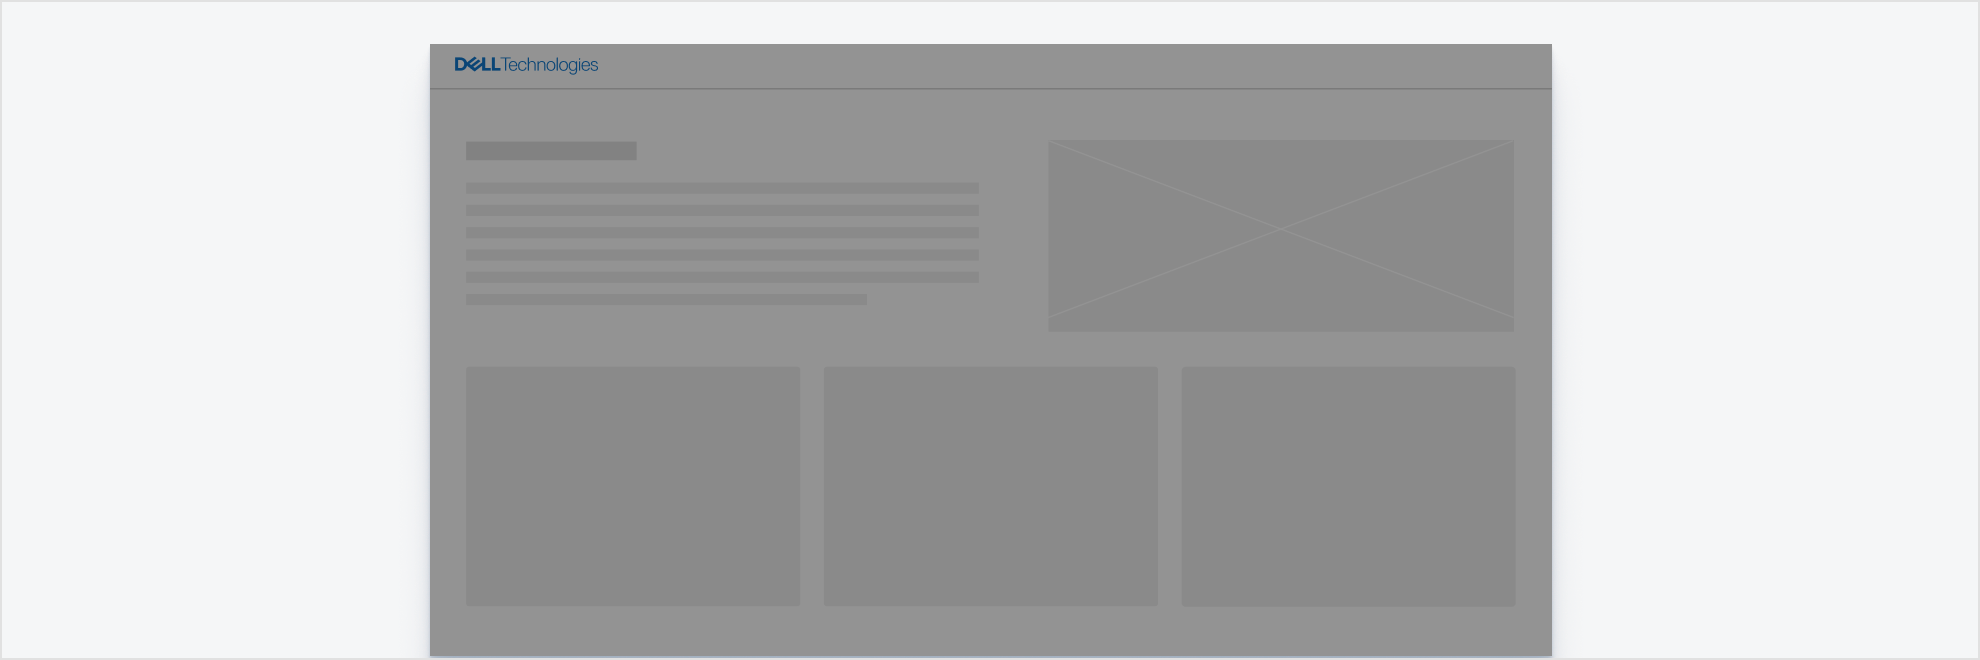 A darkened overlay over a page of content.